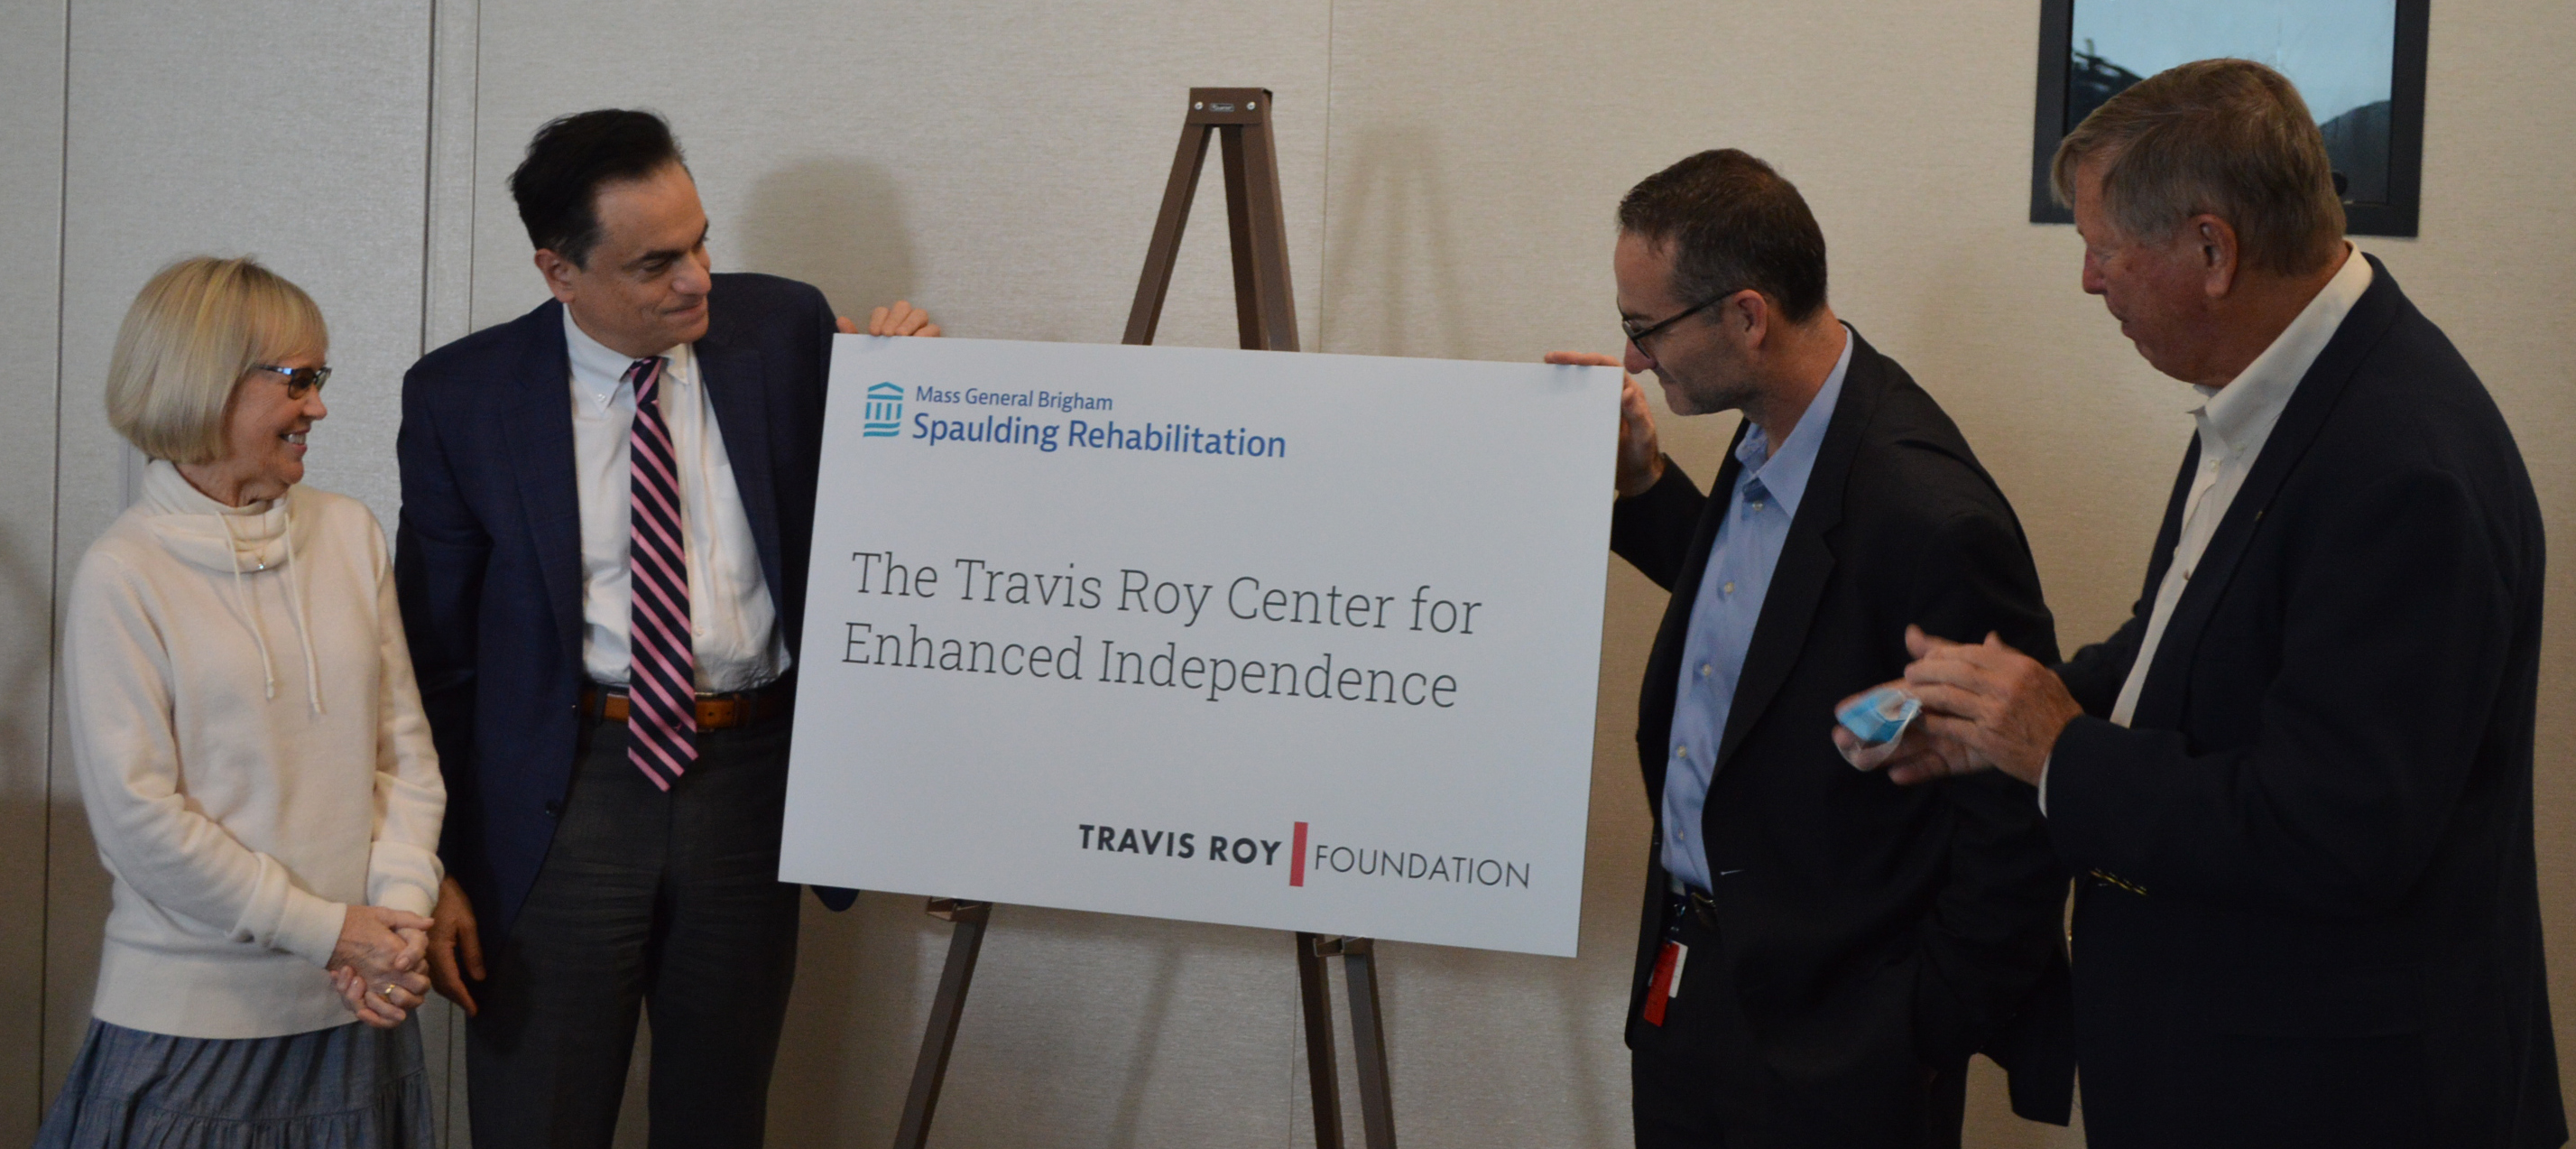 Four people looking at a sign that says "The Travis Roy Center for Enhanced Independence"